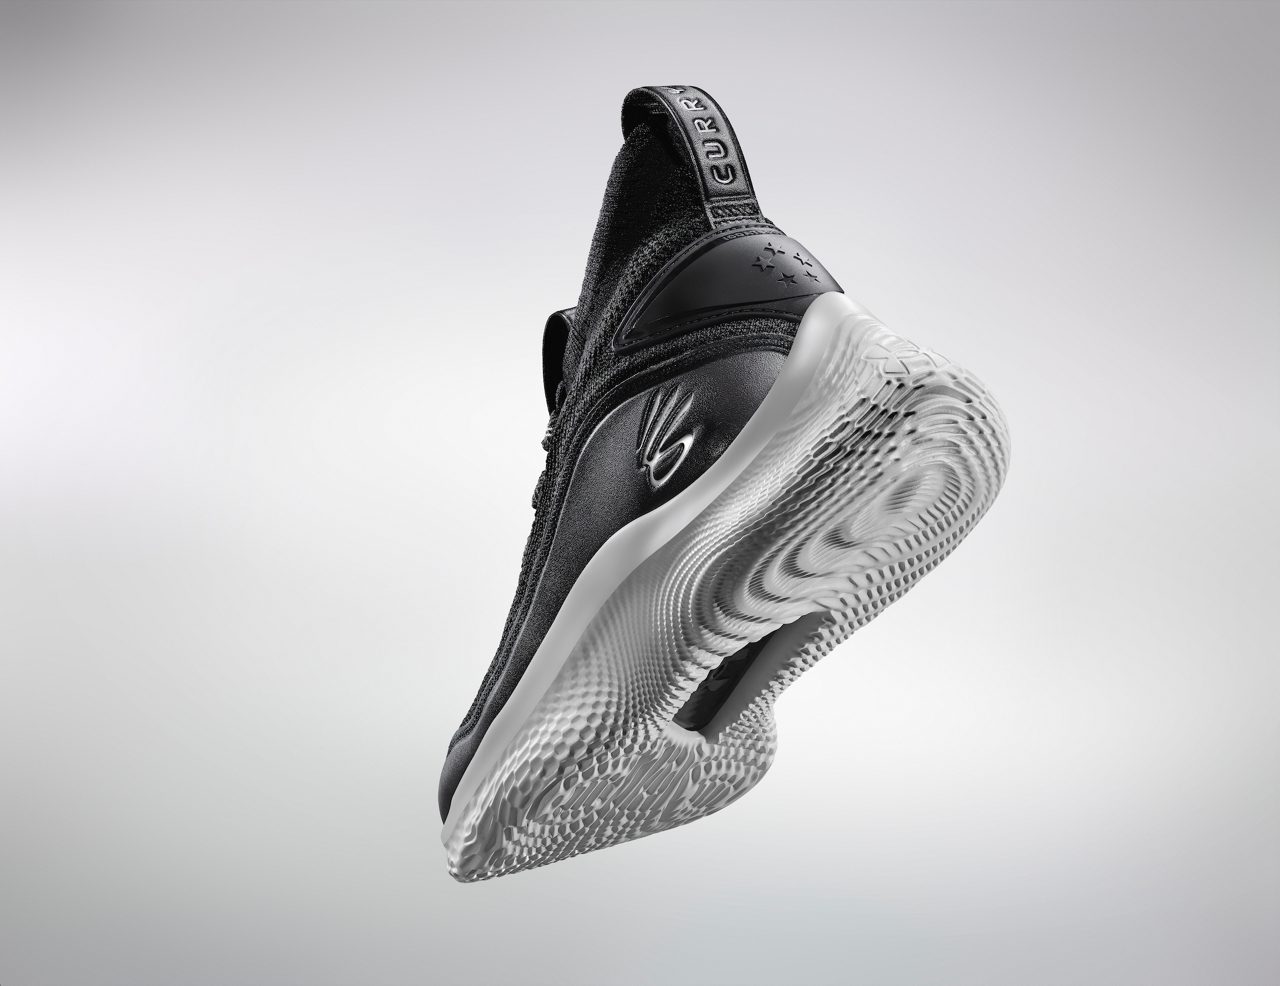 The Curry Flow 8 basketball shoe hovering on white background, with a focus on the sole of the shoe